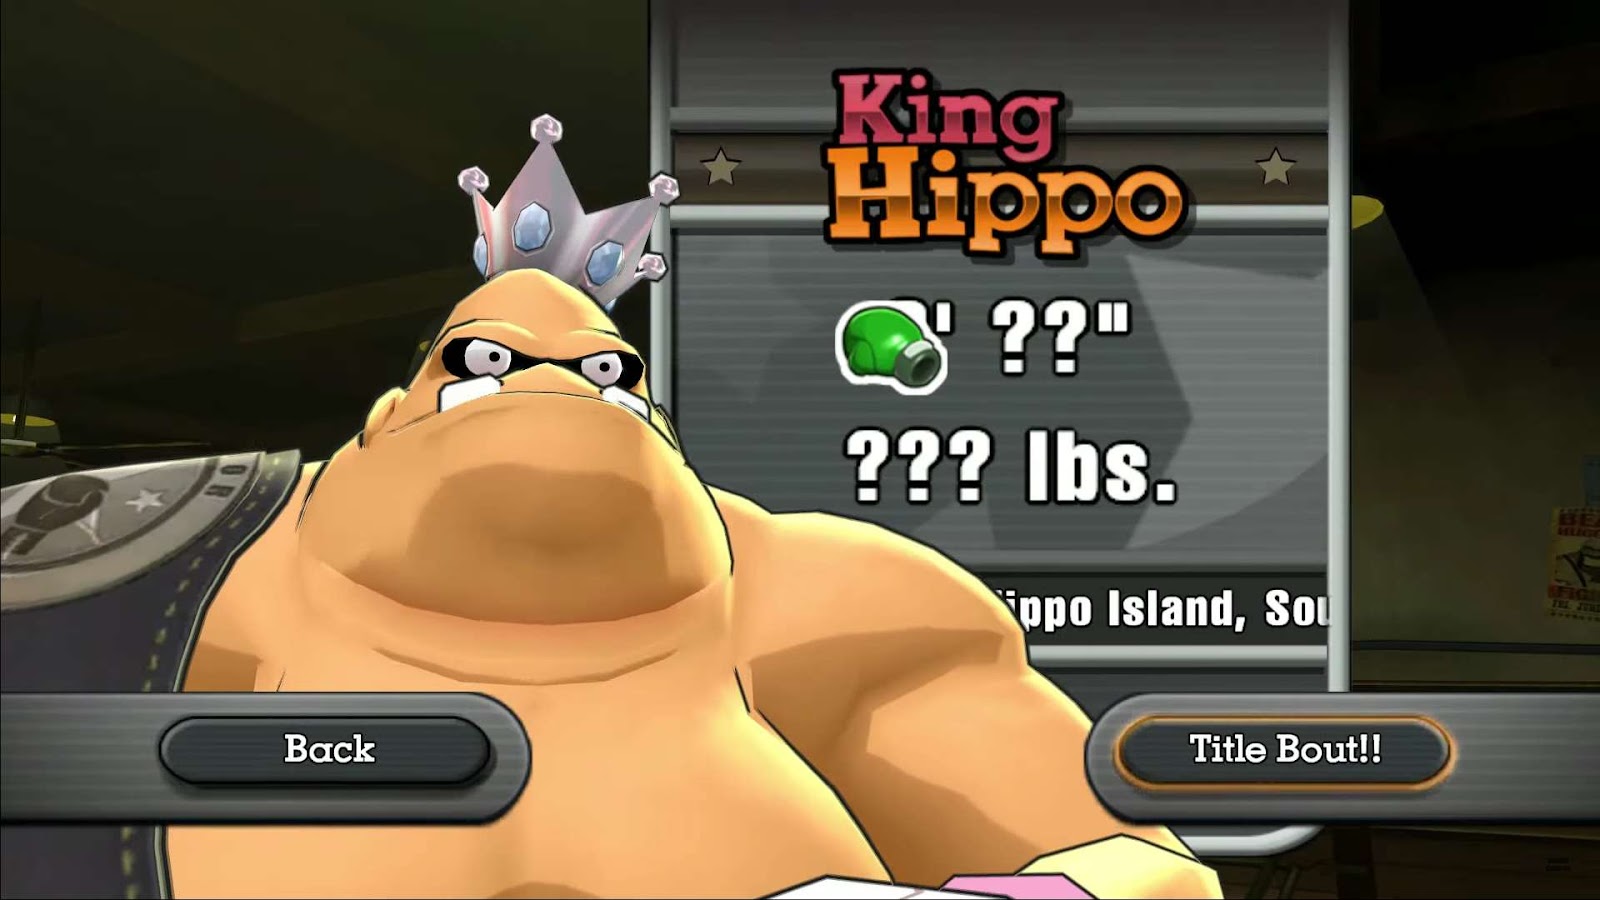 King Hippo game character